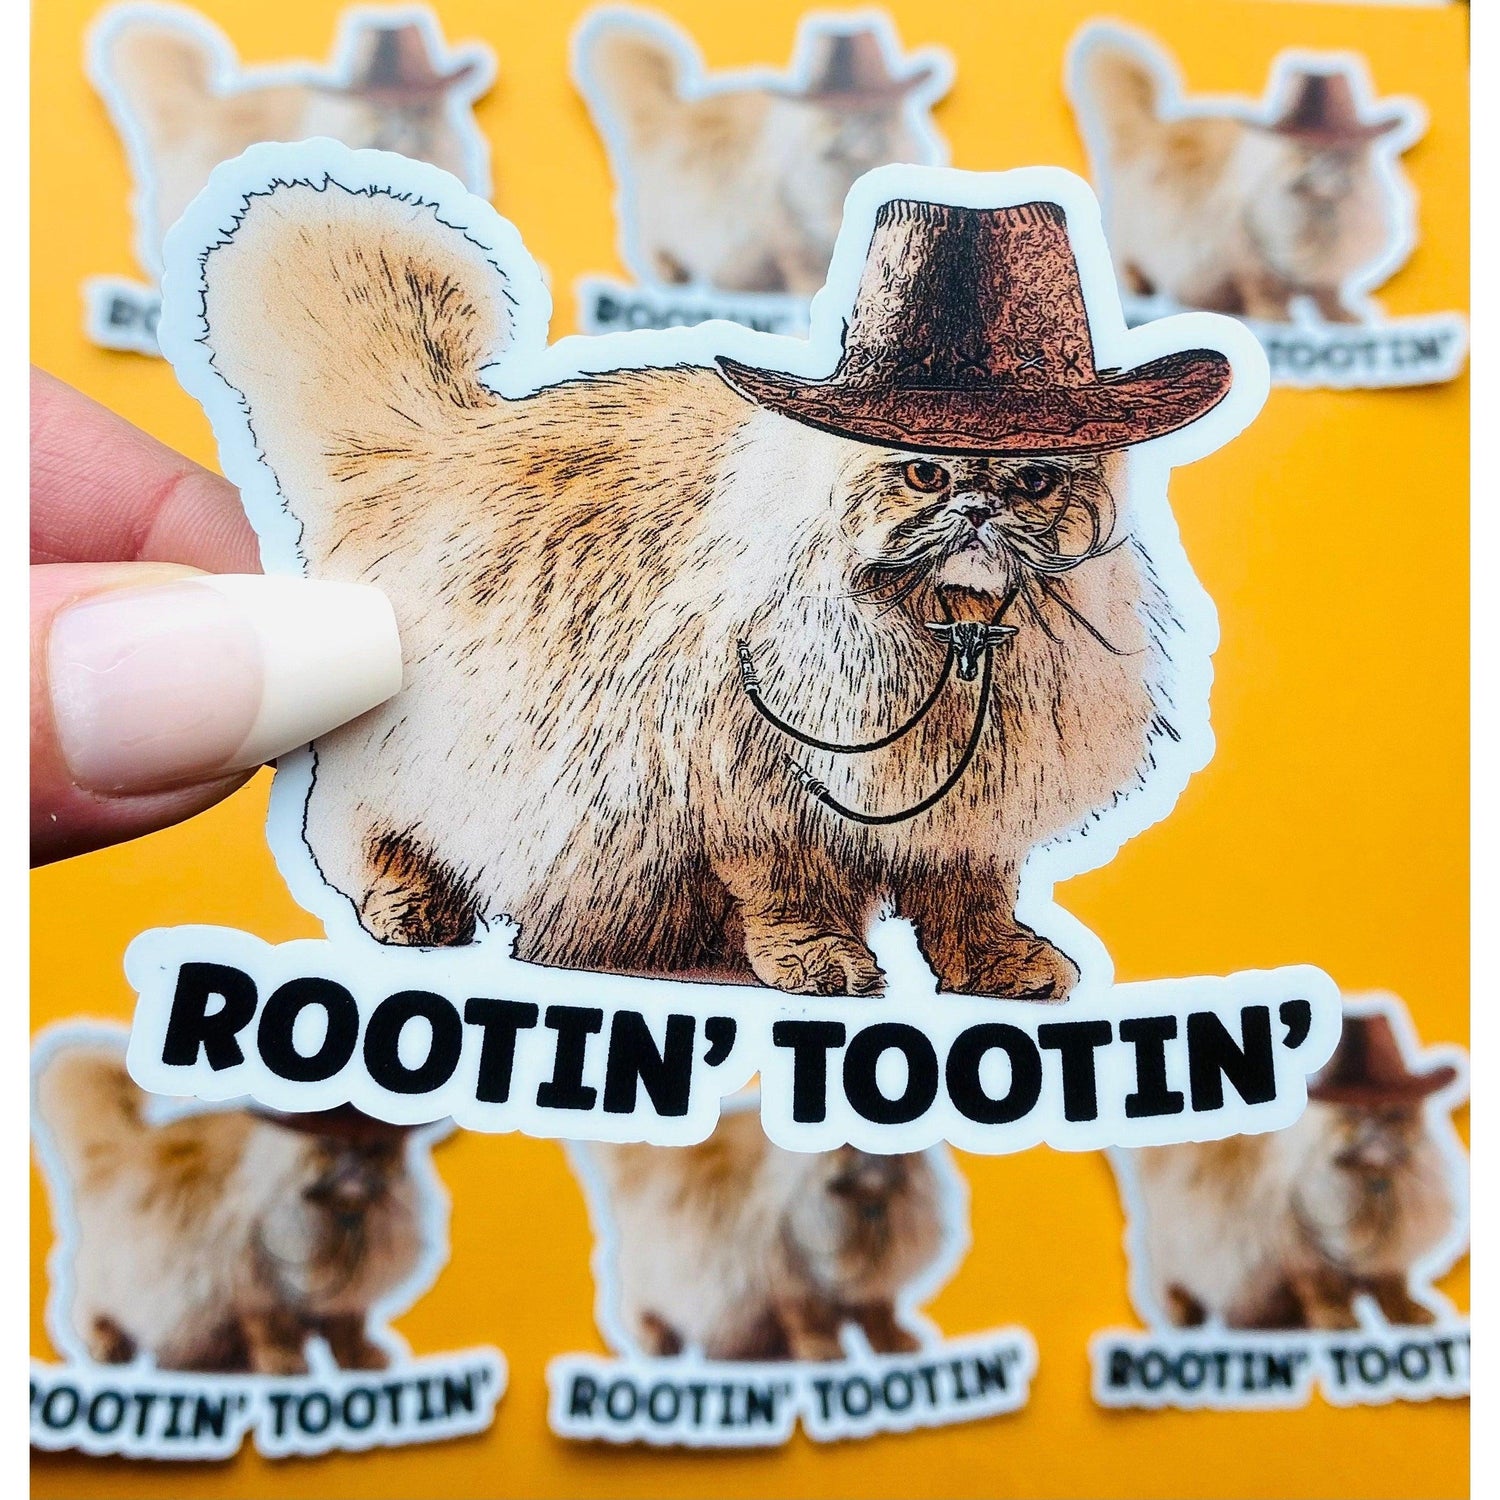 Rootin' Tootin' Cowboy Cat Sticker for Country Living Cat Cowboy Hat Sticker Country Kitty Decal Funny Country Sticker - Ottos Grotto :: Stickers For Your Stuff